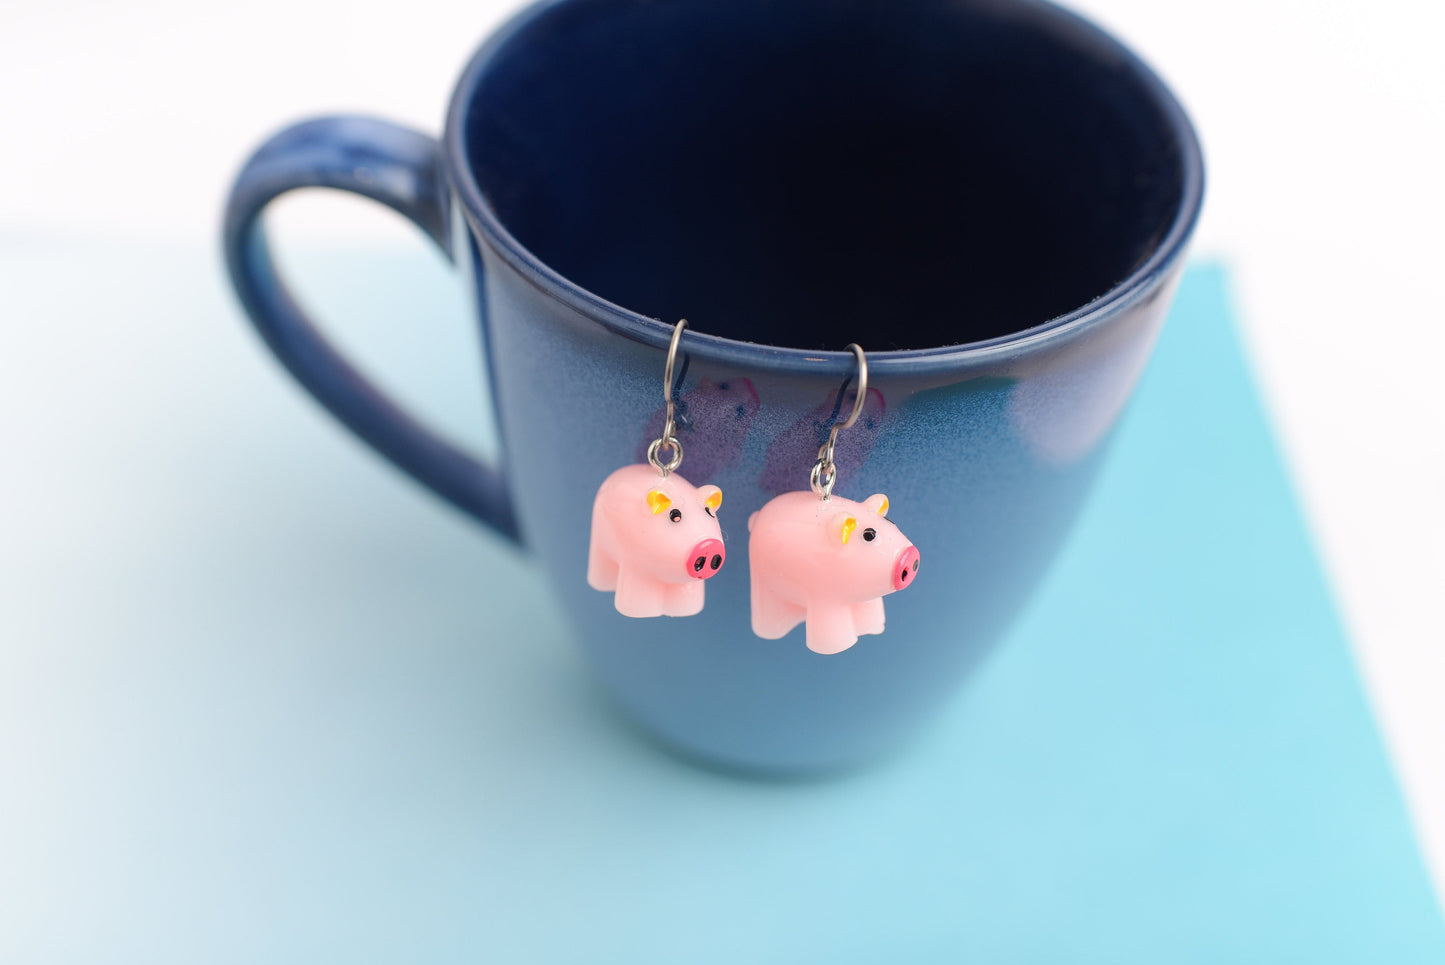 Barnyard Animal Earrings with Titanium Ear Wires- Pig, Cow, or Chicken